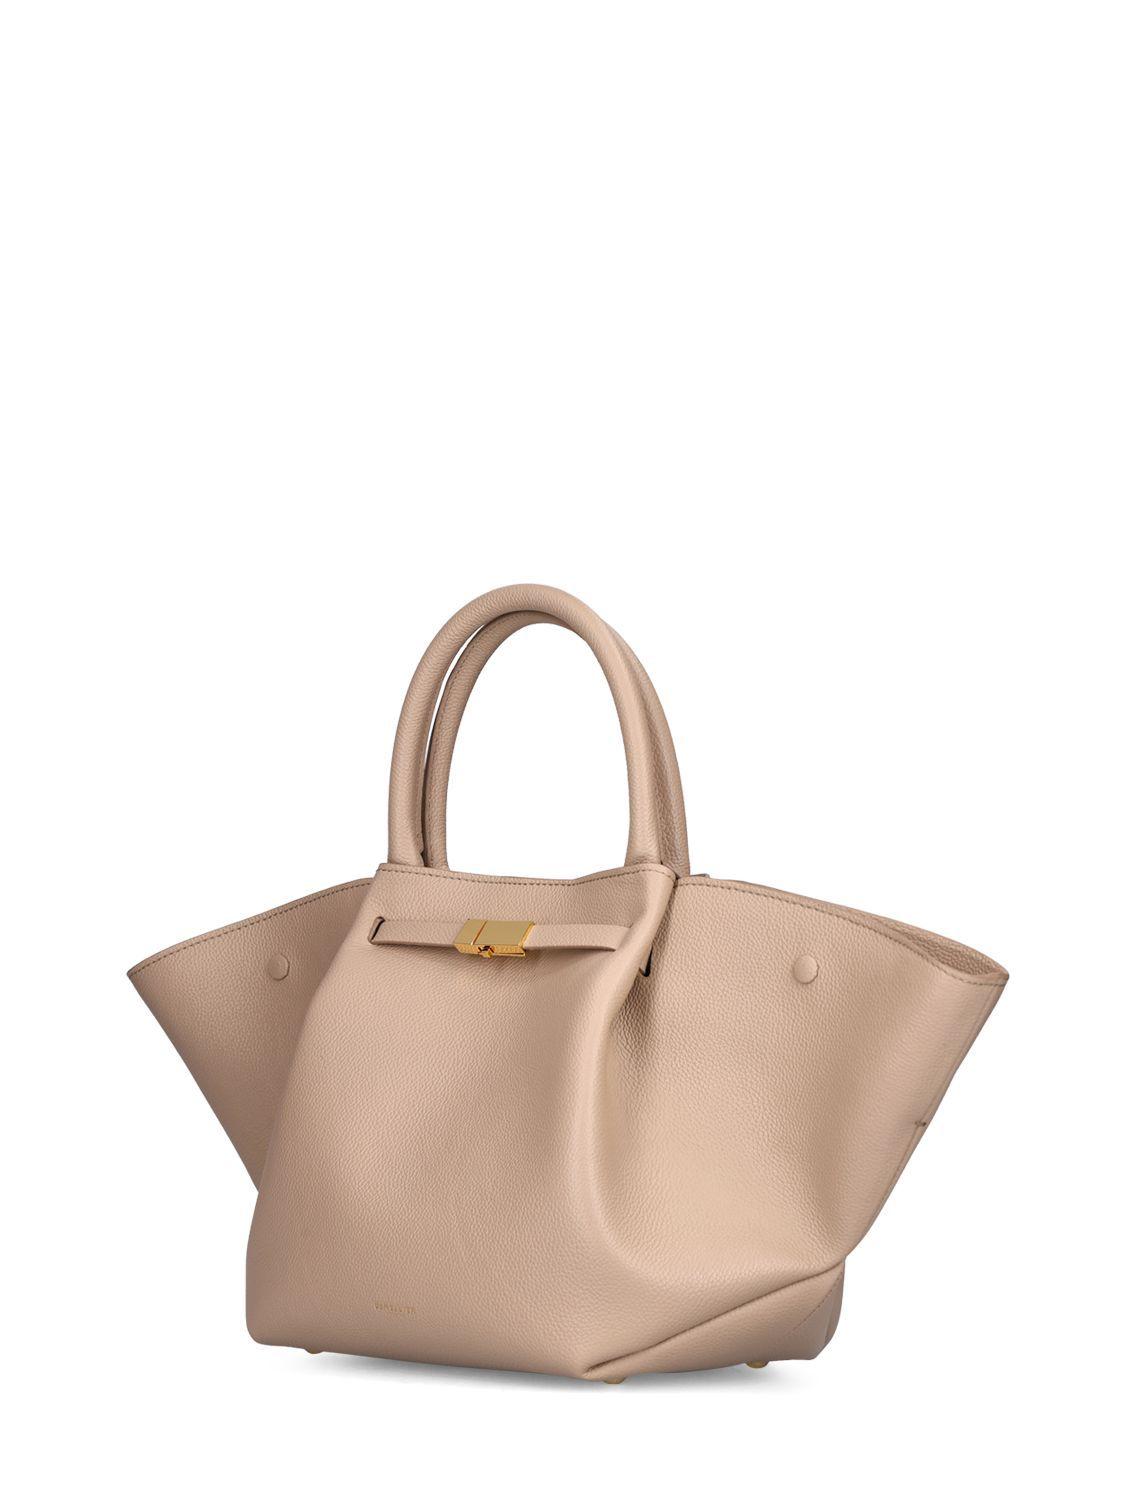 Demellier | The New York Large Bucket in Taupe Small Grain | Leather Shoulder Bag